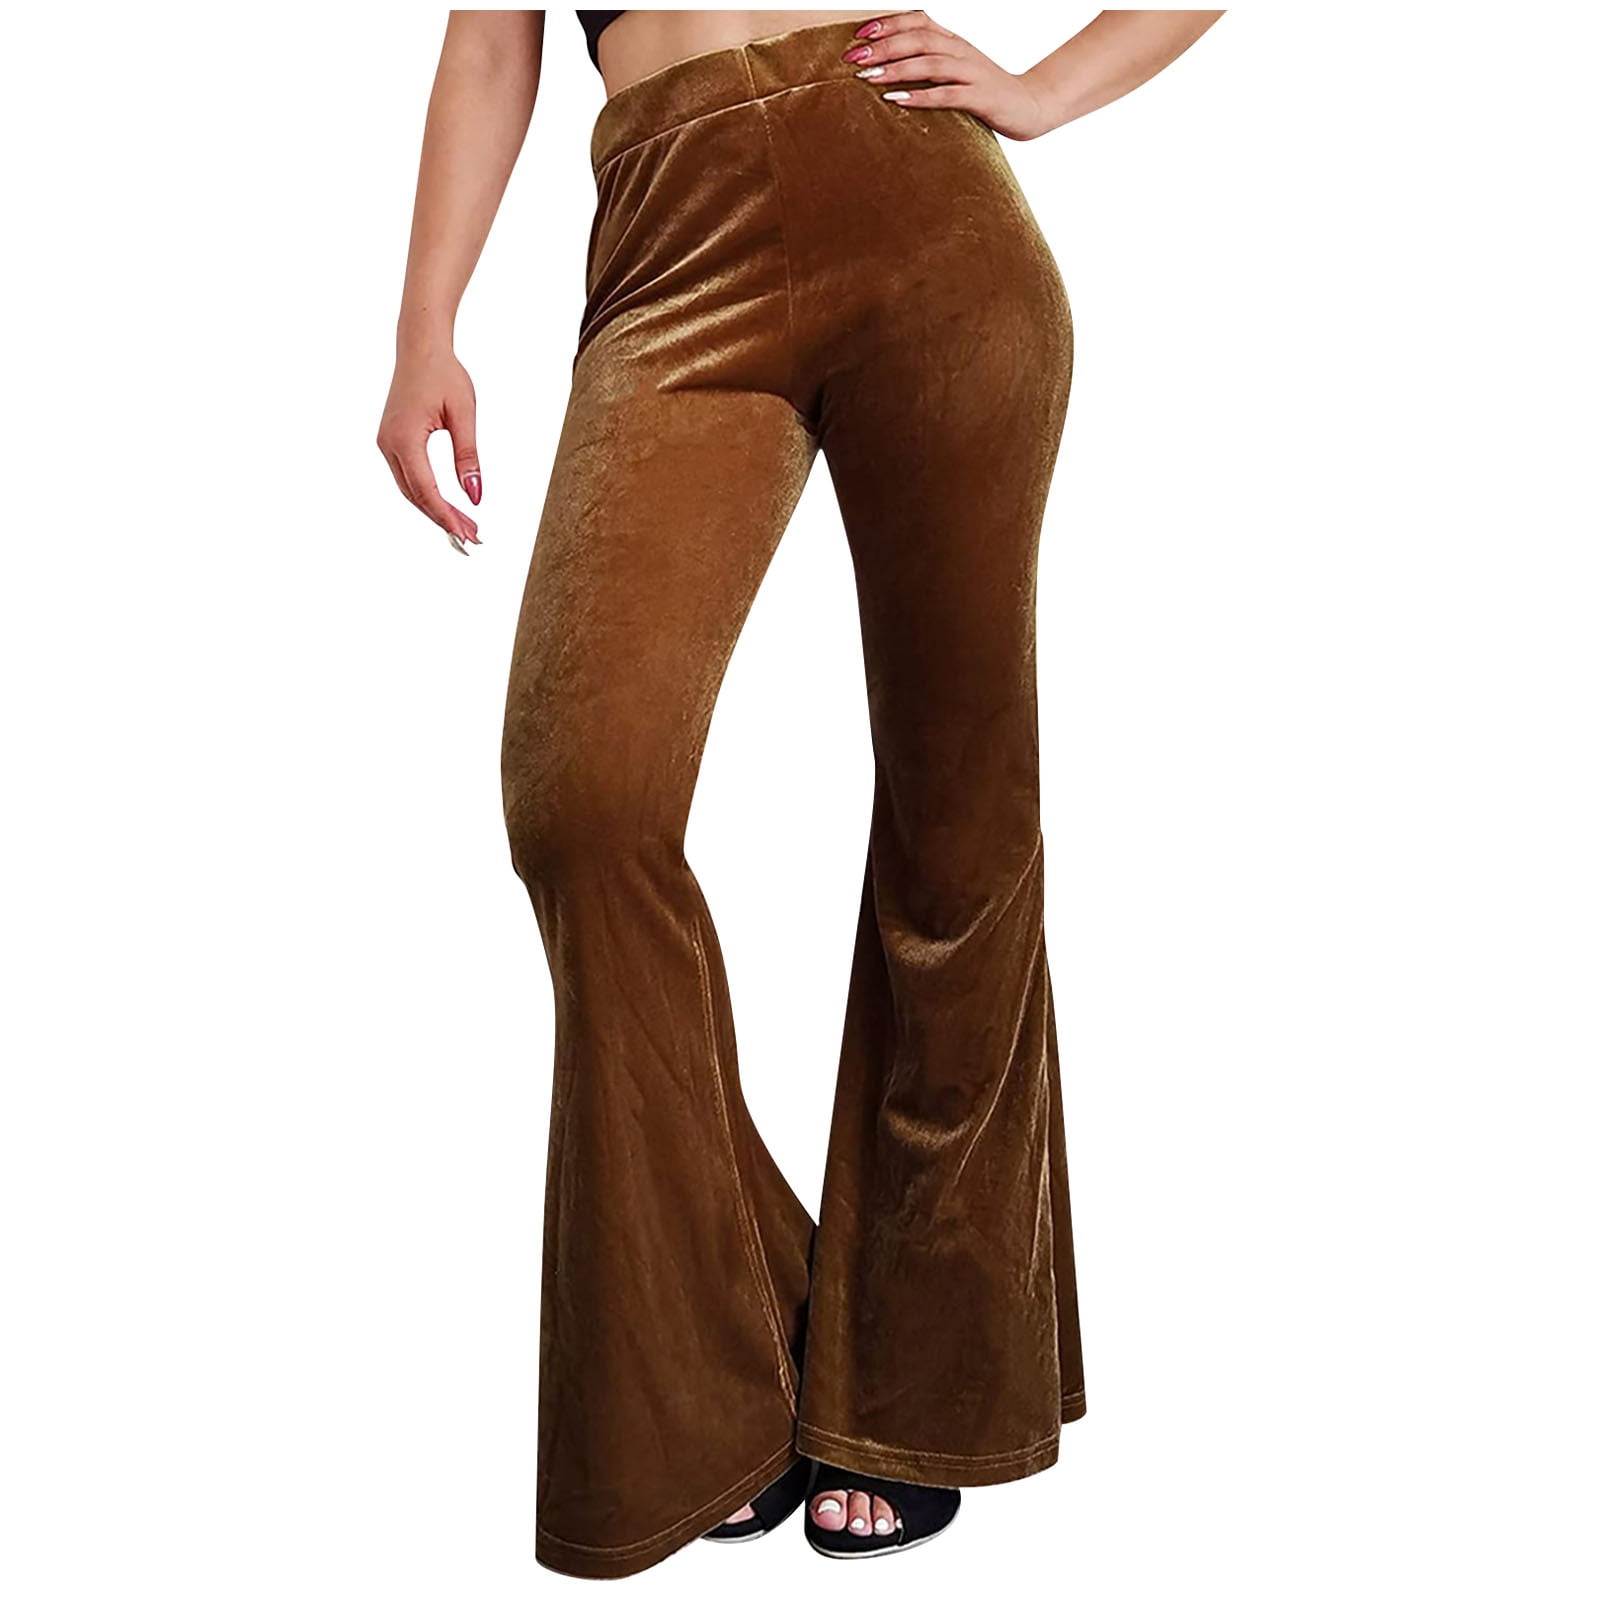 YWDJ Bell Bottom Pants for Women 70s Leggings High Waist High Rise Flared  Elastic Waist Casual Stretchy Long Pant Fashion Comfortable Solid Color  Leisure Bell-bottoms Pants Pants 17-Coffee L 